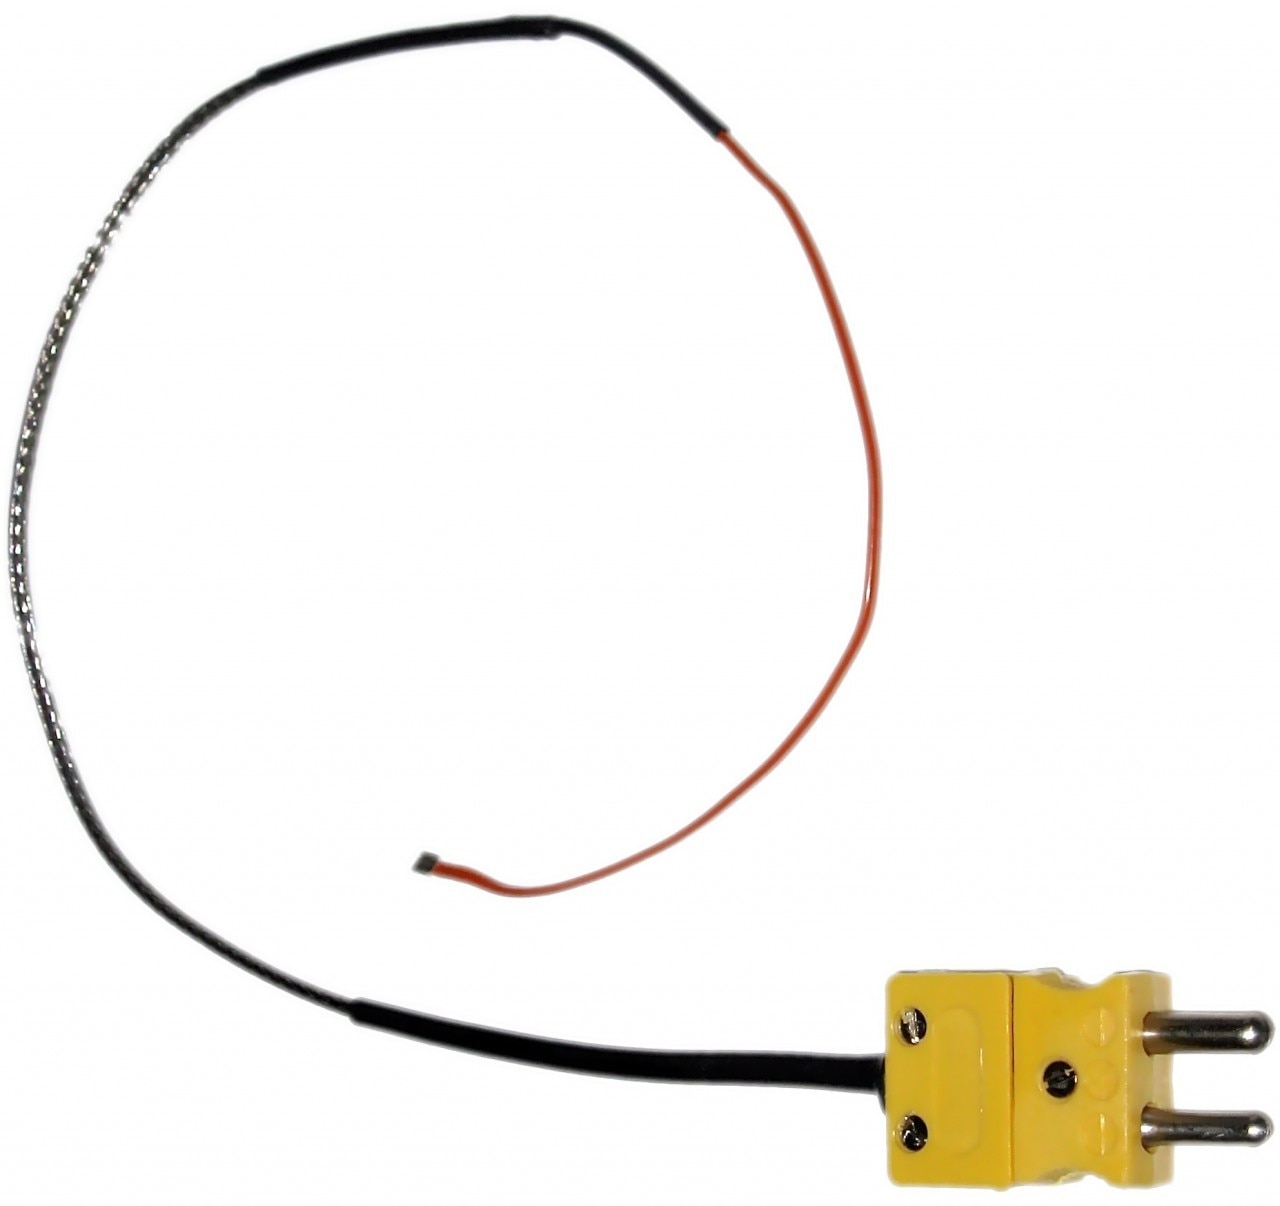 products-thermocouple__75391.1264014973.1280.1280.jpg